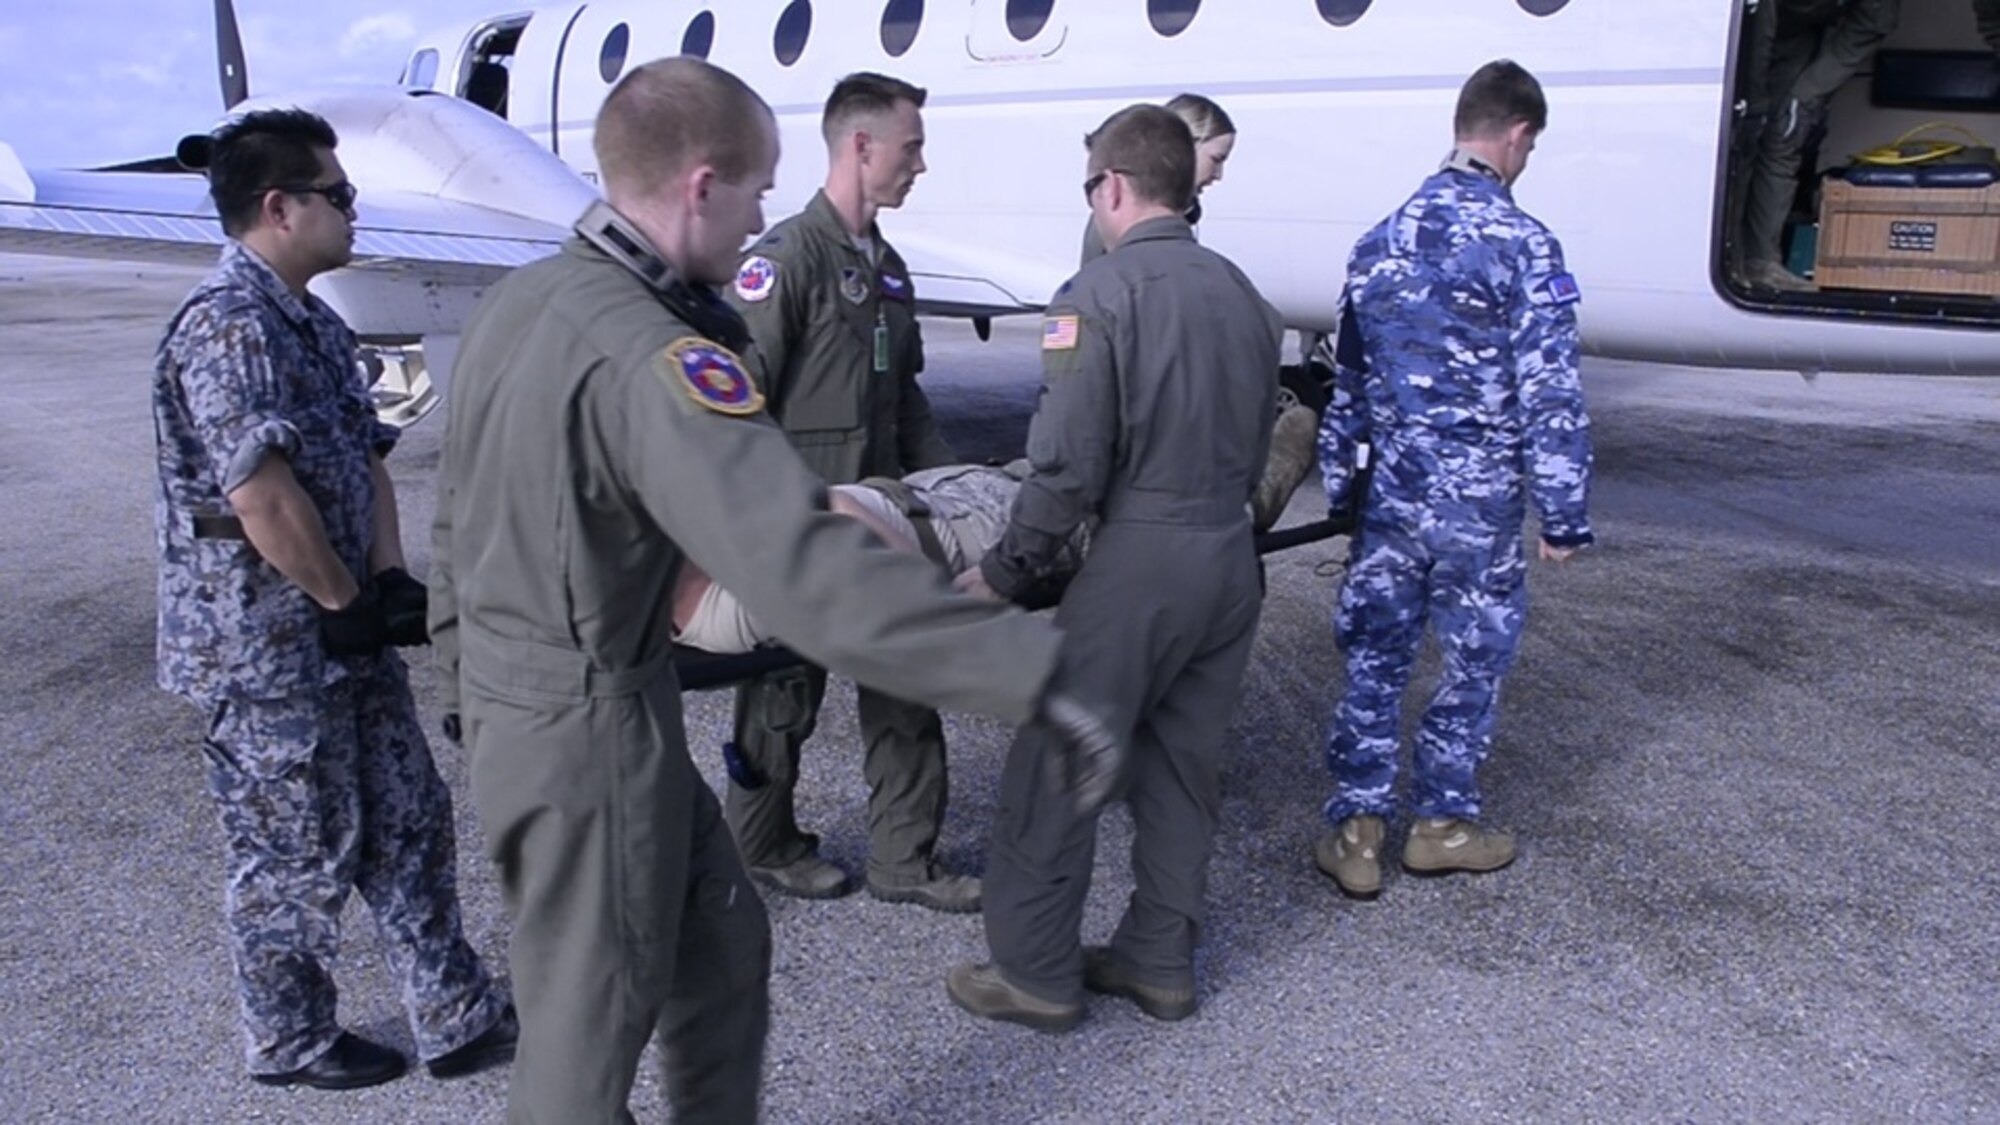 Aeromedical evacuation Airmen from the U.S., Japanese, and Australian air forces transport a simulated patient to a U.S. Air Force C-12 Huron as part of annual exercise Cope North at Tinian Air Field, Mariana Islands, Feb. 21, 2017. Aeromedical evacuation training was conducted on the Huron to familiarize Airmen with patient care on a new airframe. Cope North is a long-standing exercise designed to enhance multilateral air operations between the partnered militaries, bringing together more than 2,700 U.S. Airmen, Sailors and Marines who are training alongside approximately 600 combined Japan Air Self-Defense Force and Royal Australian Air Force participants. (Courtesy photo)